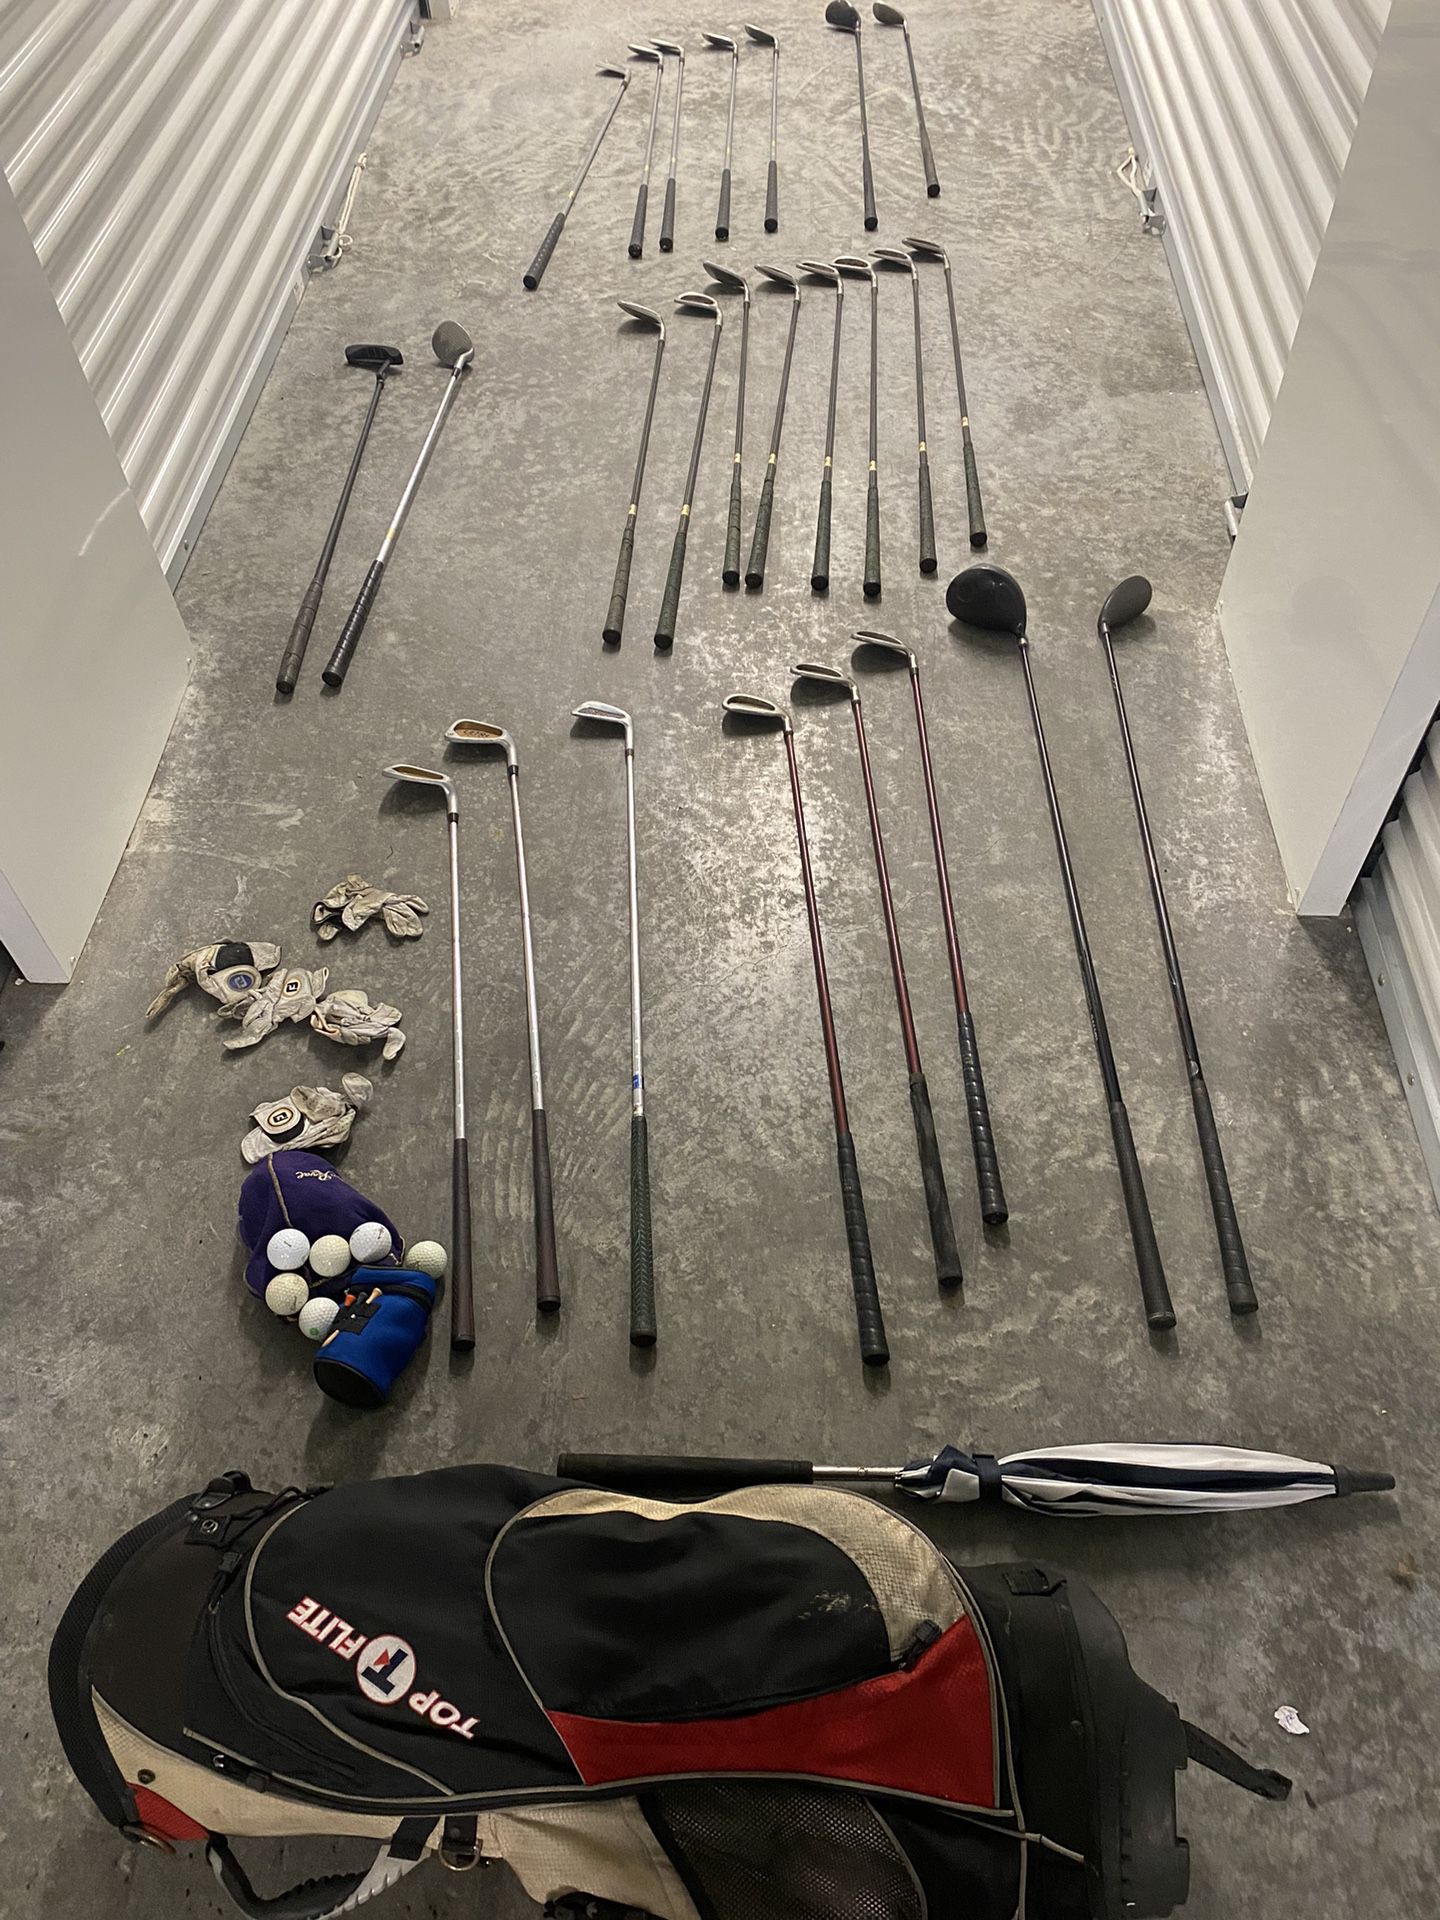 top flight,wilson/kp power/orlimar trimetal/alien pat simmons/taylor 25 Clubs   Item have some manageable rust  25 clubs included  Balls included  Use